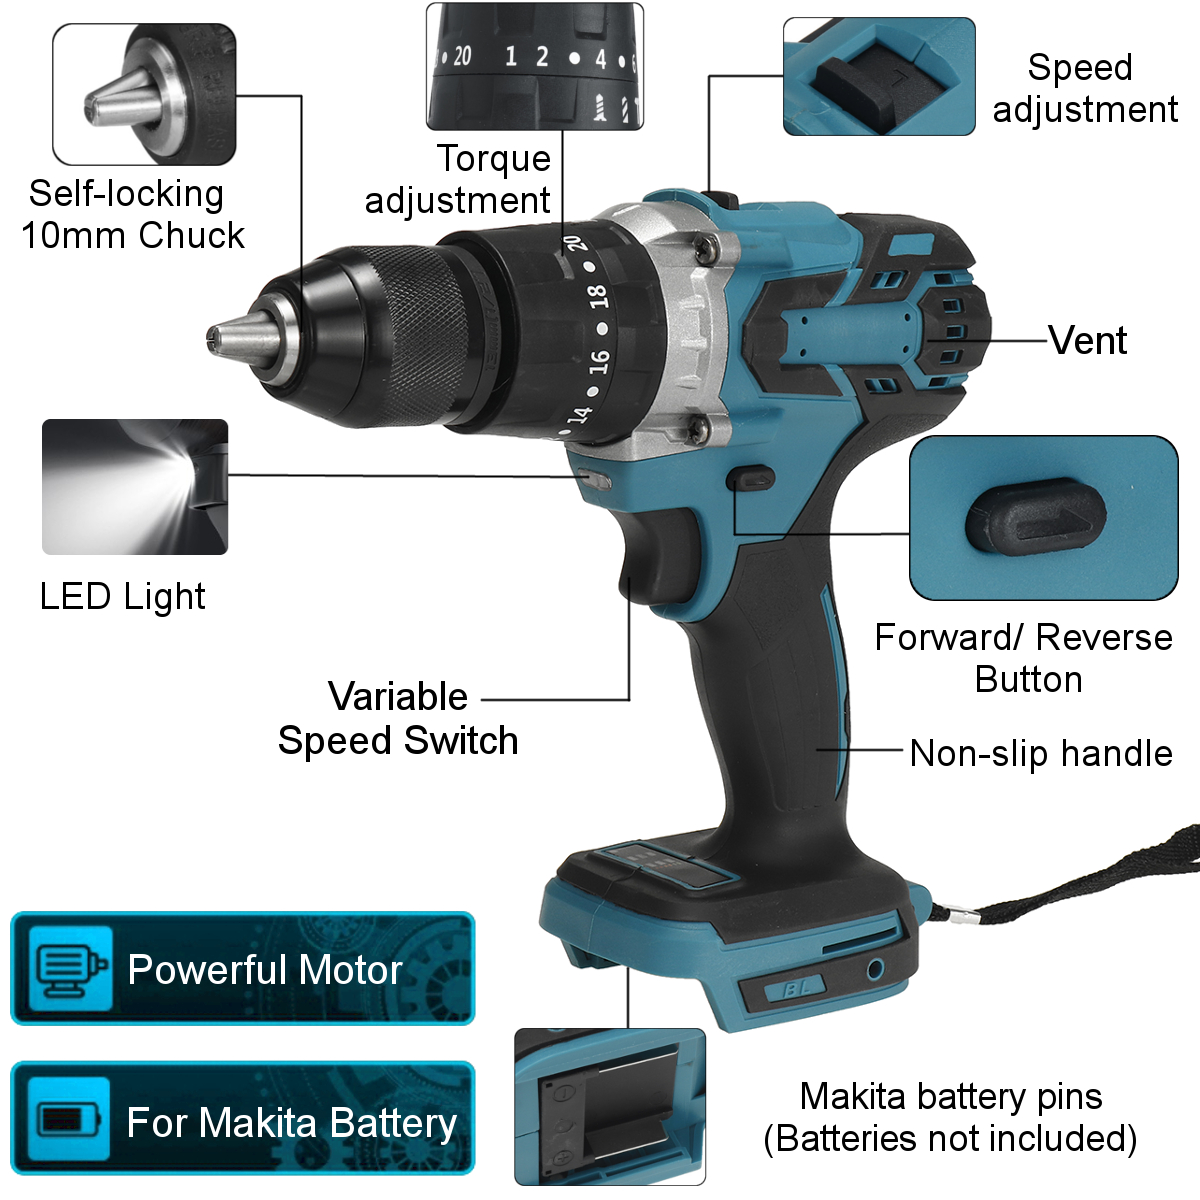 Brushless-Electric-Drill-20-Torque-520NM-Cordless-Screwdriver-13mm-Chuck-Power-Drill-for-Makita-18V--1801609-13